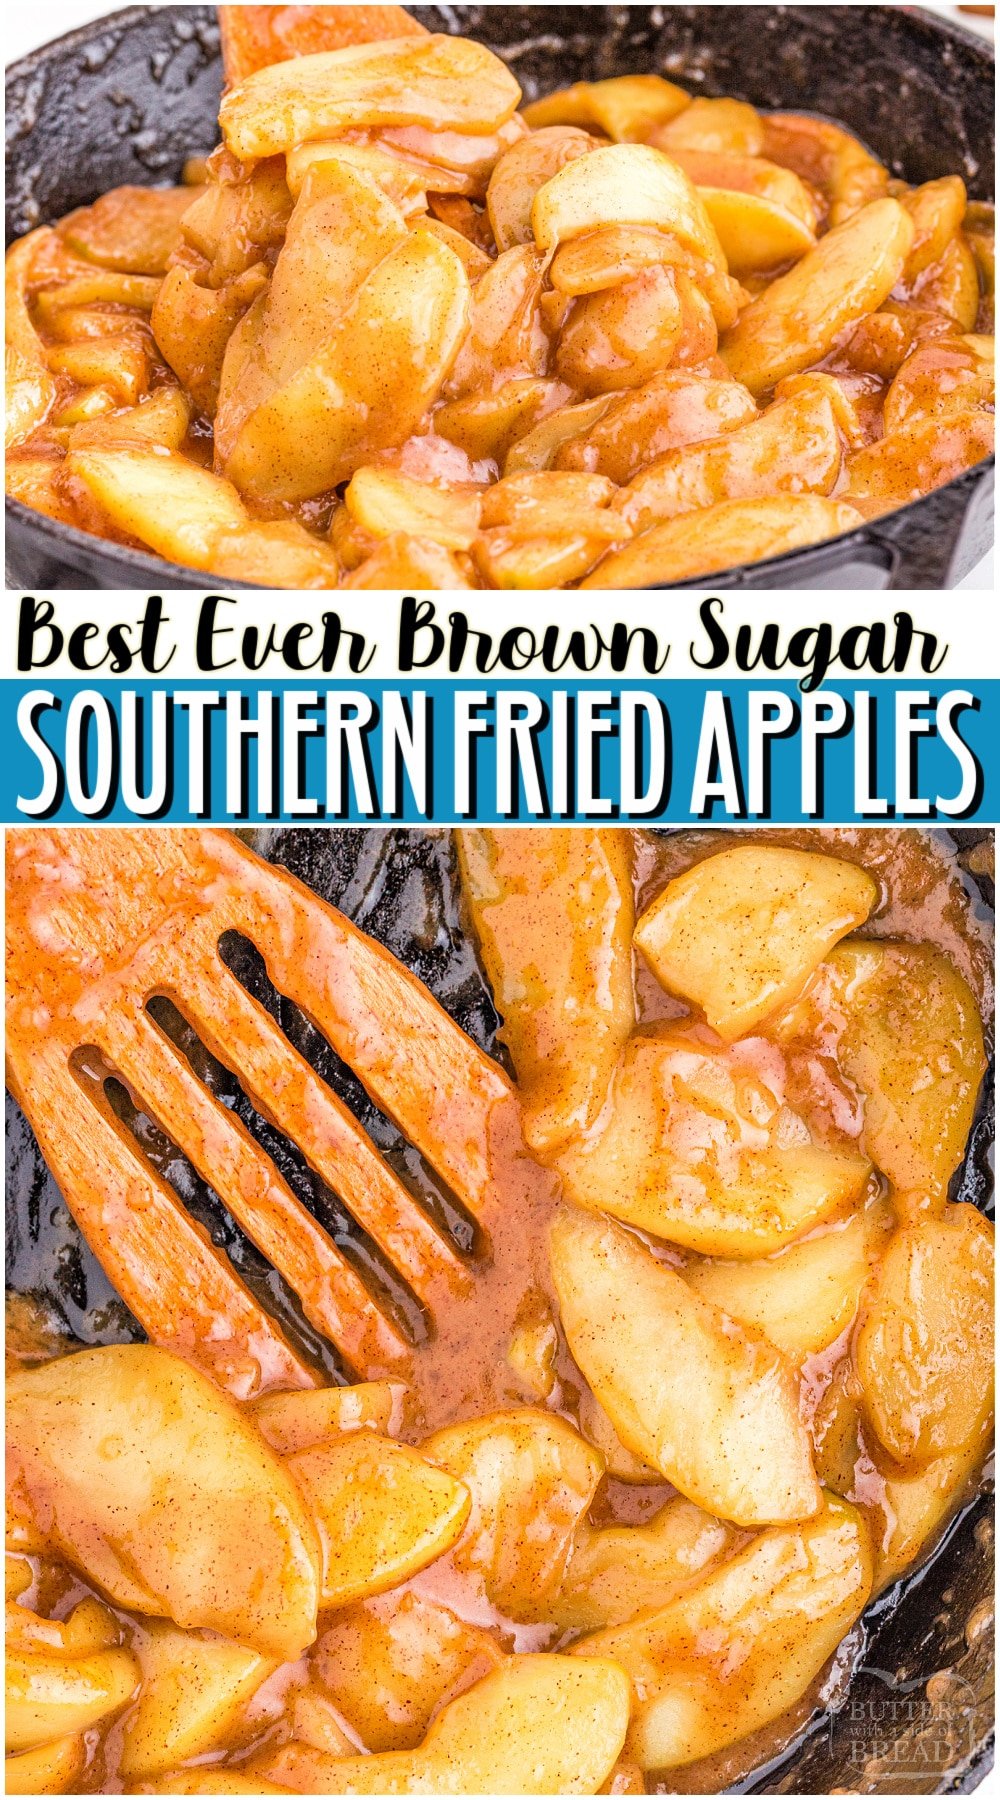 BROWN SUGAR Fried Apples made easy with crisp, fresh apples, butter, cinnamon & brown sugar! Favorite sweet southern fried apples served alongside dinner or with dessert. Perfect with a big scoop of vanilla ice cream.